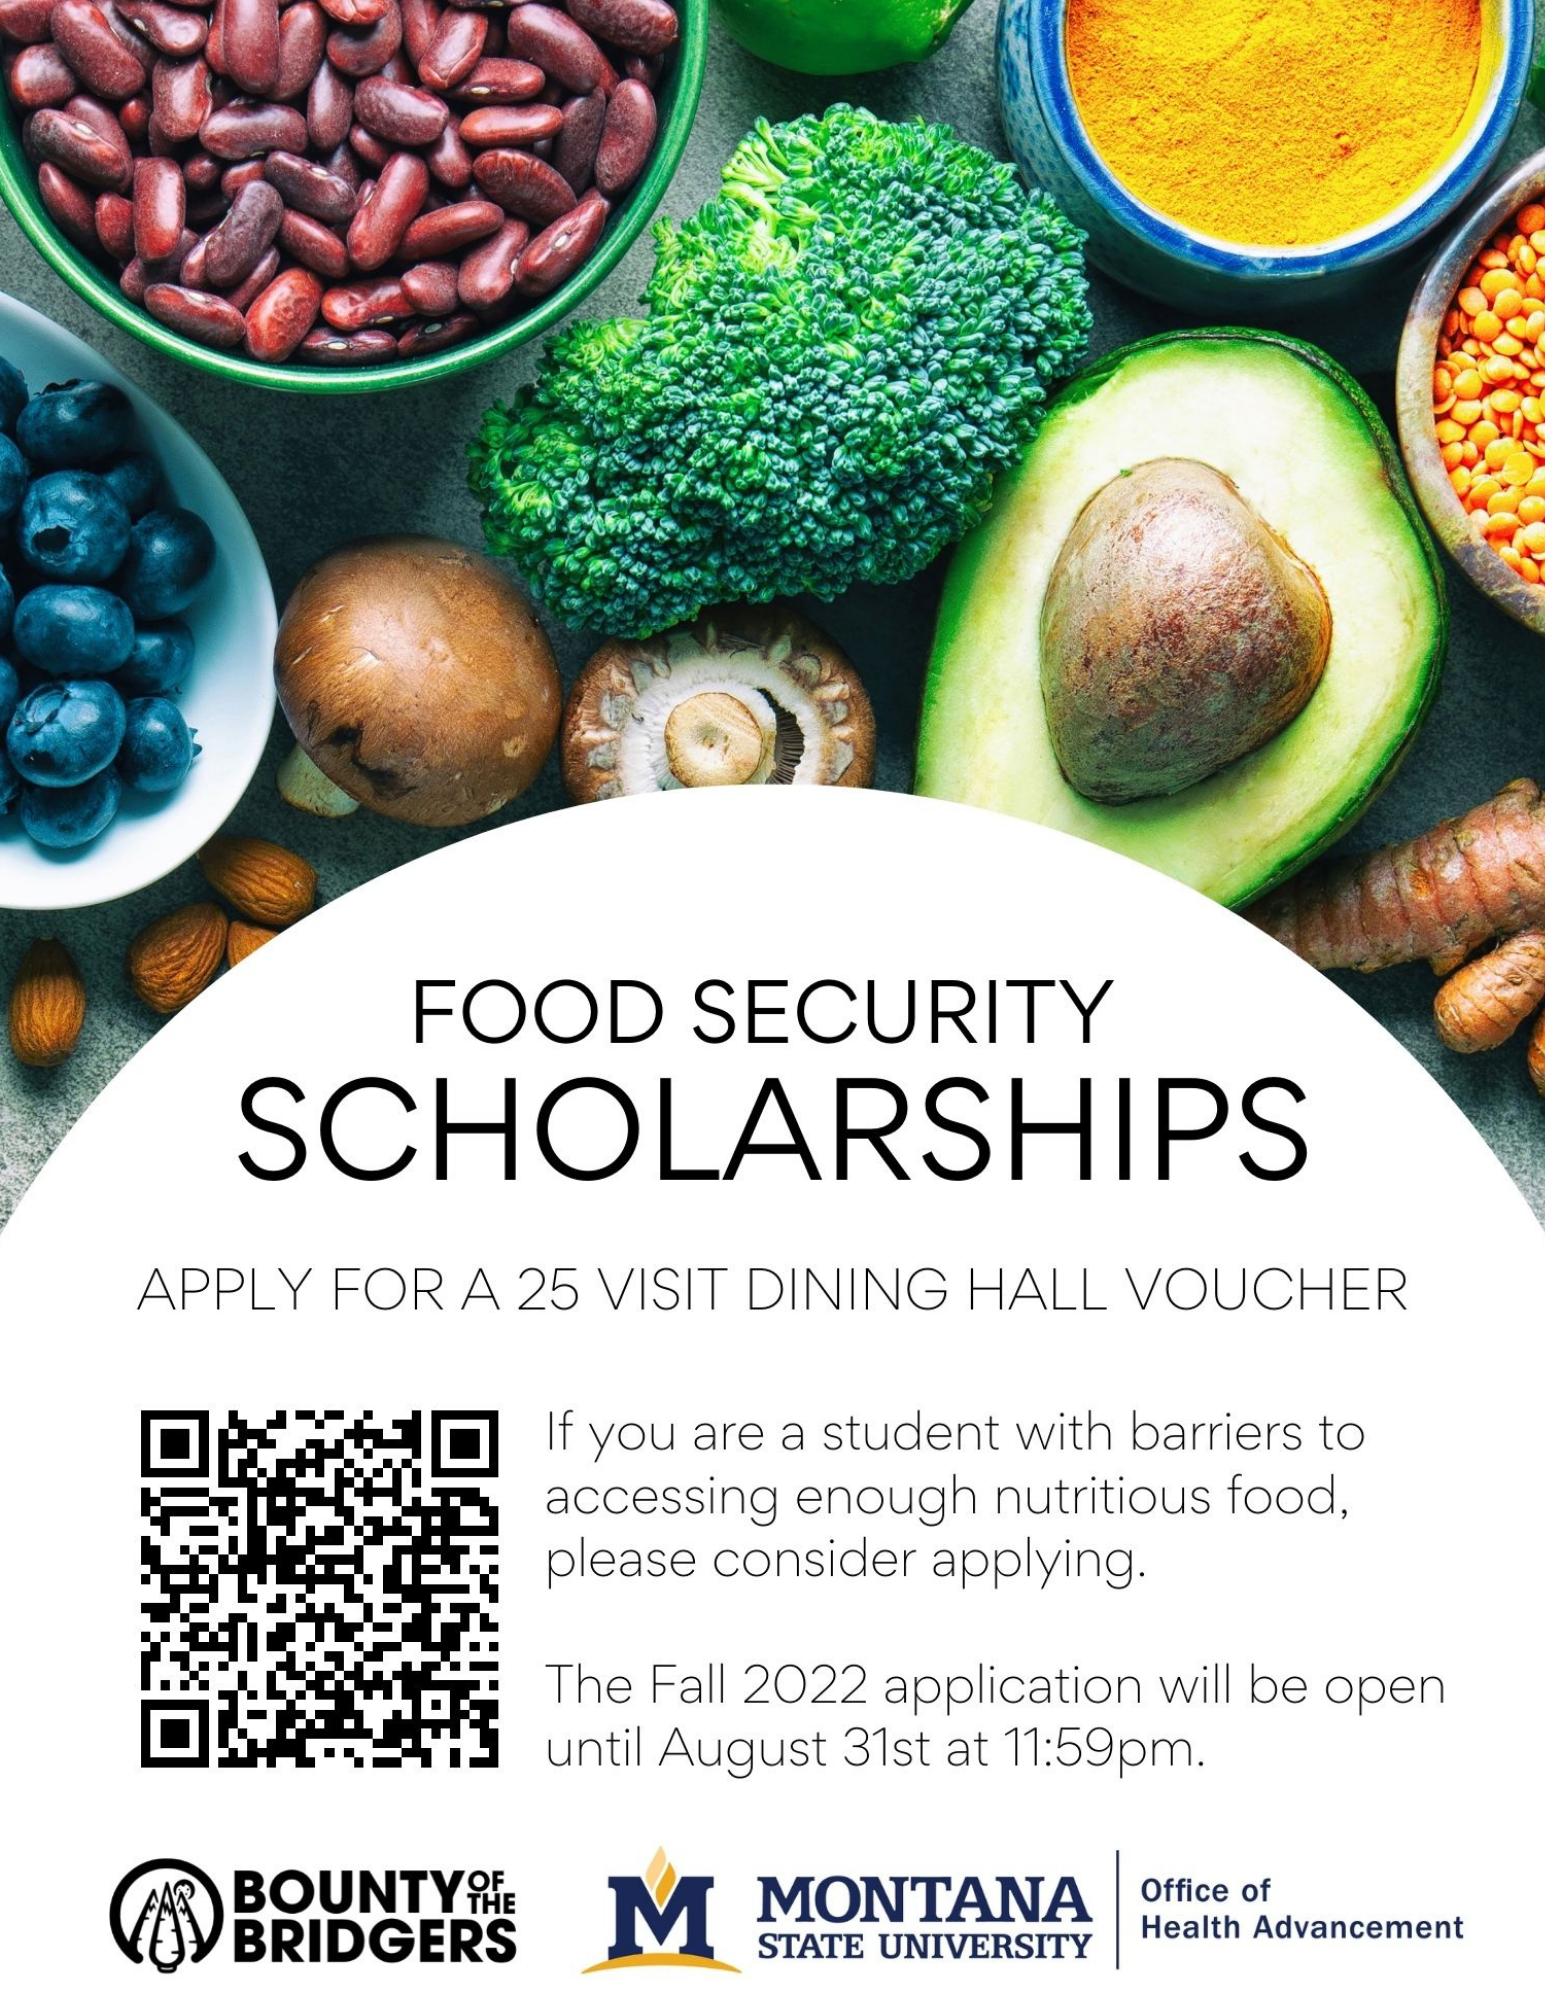 Food Security Scholarship is open until August 31st